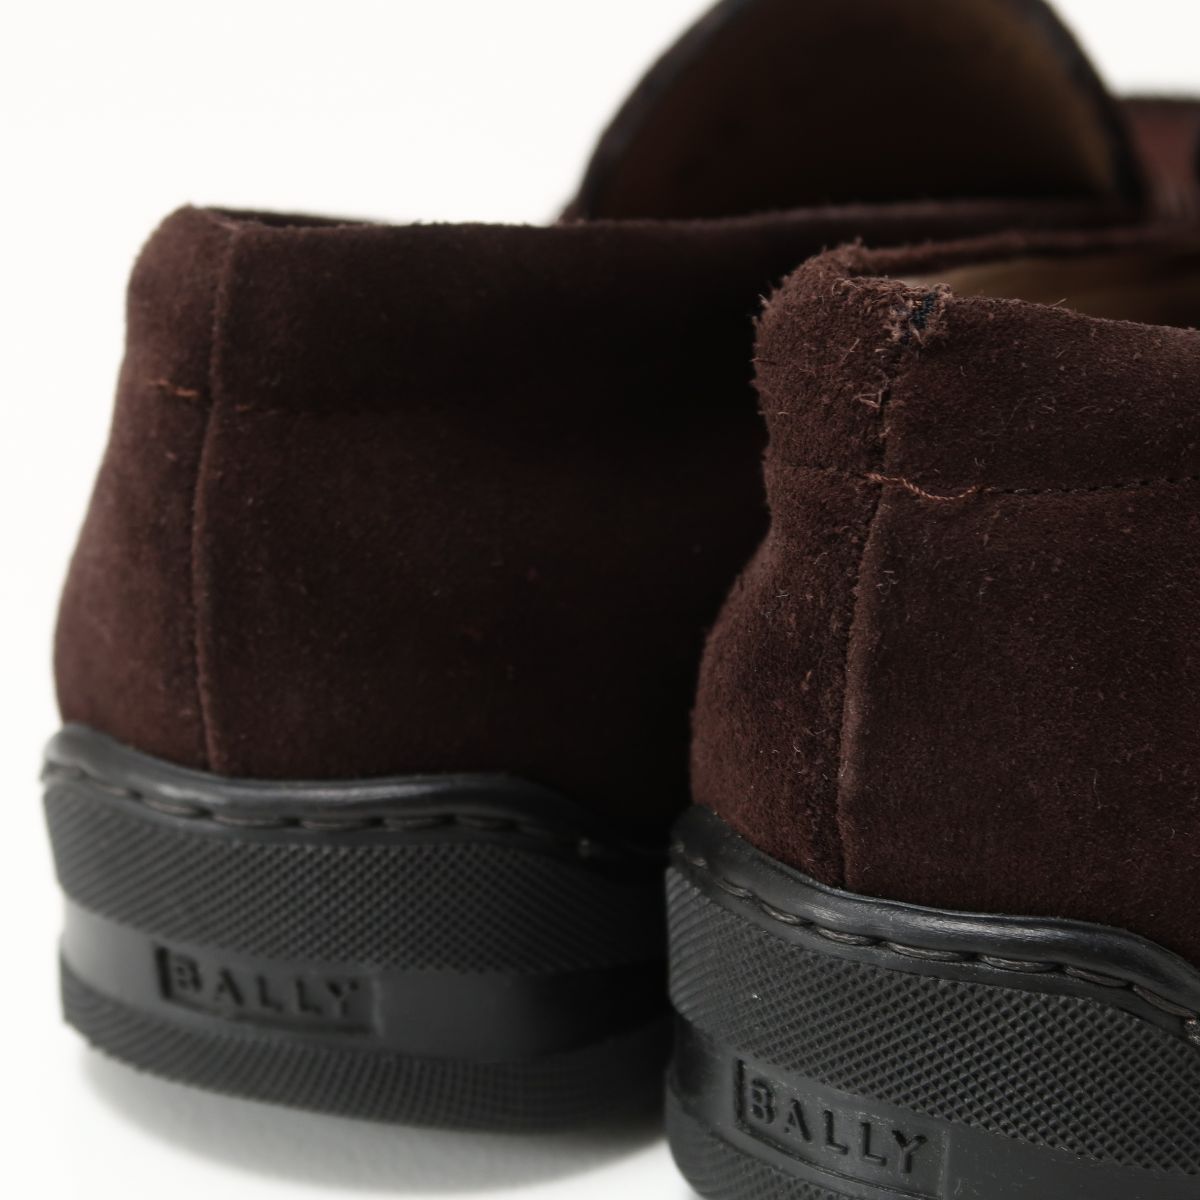 GP9840^ Italy made Bally /BALLY suede leather Loafer / slip-on shoes shoes brown group size 3.5/ approximately 23.5cm corresponding 